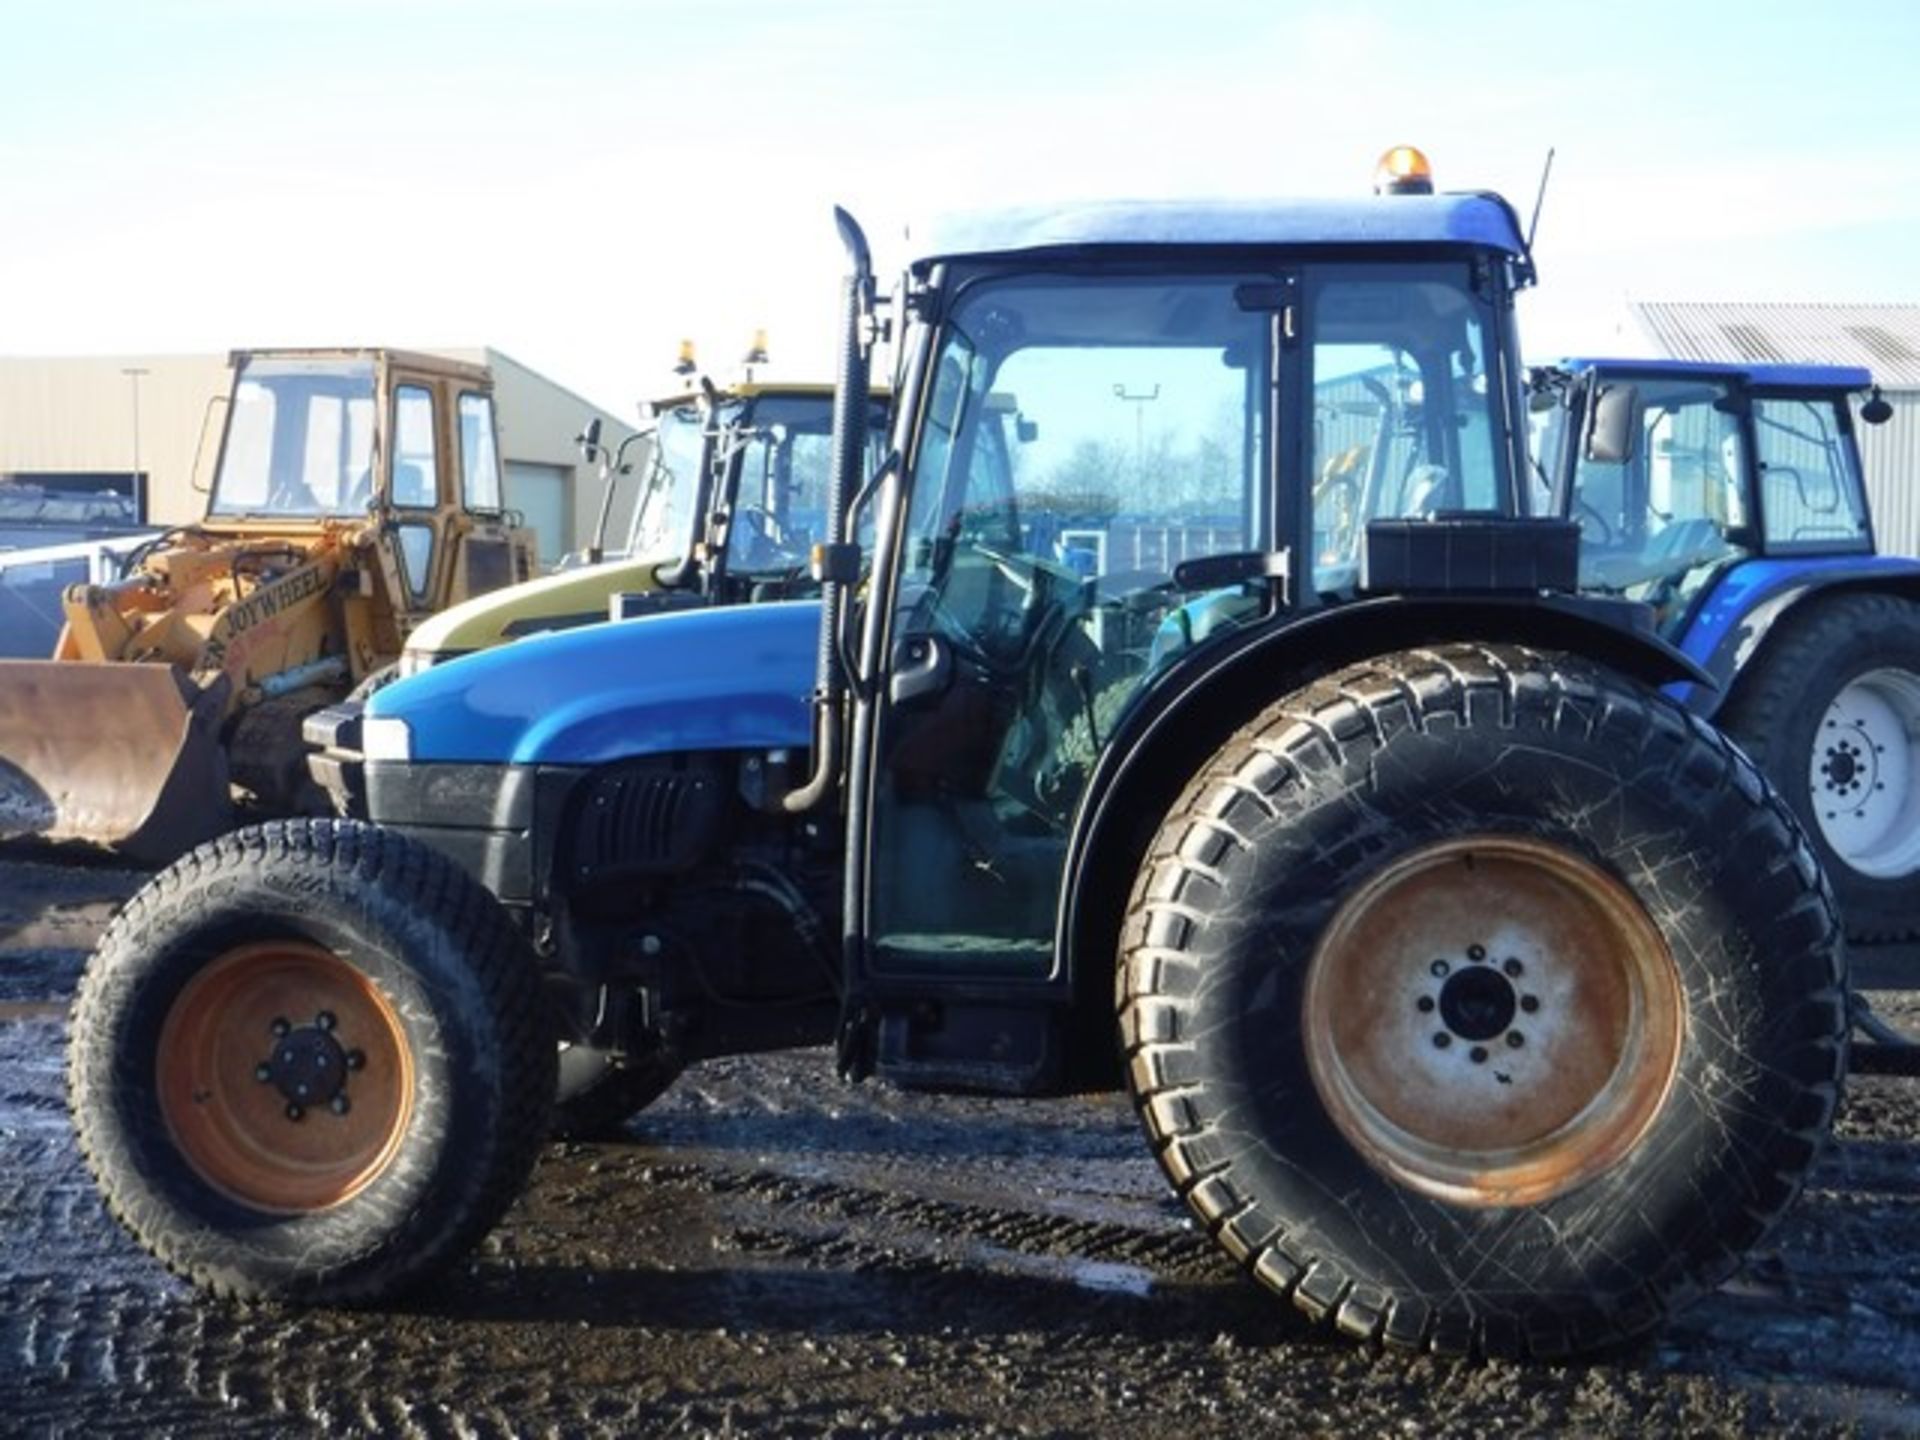 NEW HOLLAND TRACTOR C/W REAR PTO 1727HRS (CORRECT) REG - AW02AUT YEAR 2002 - Image 4 of 9